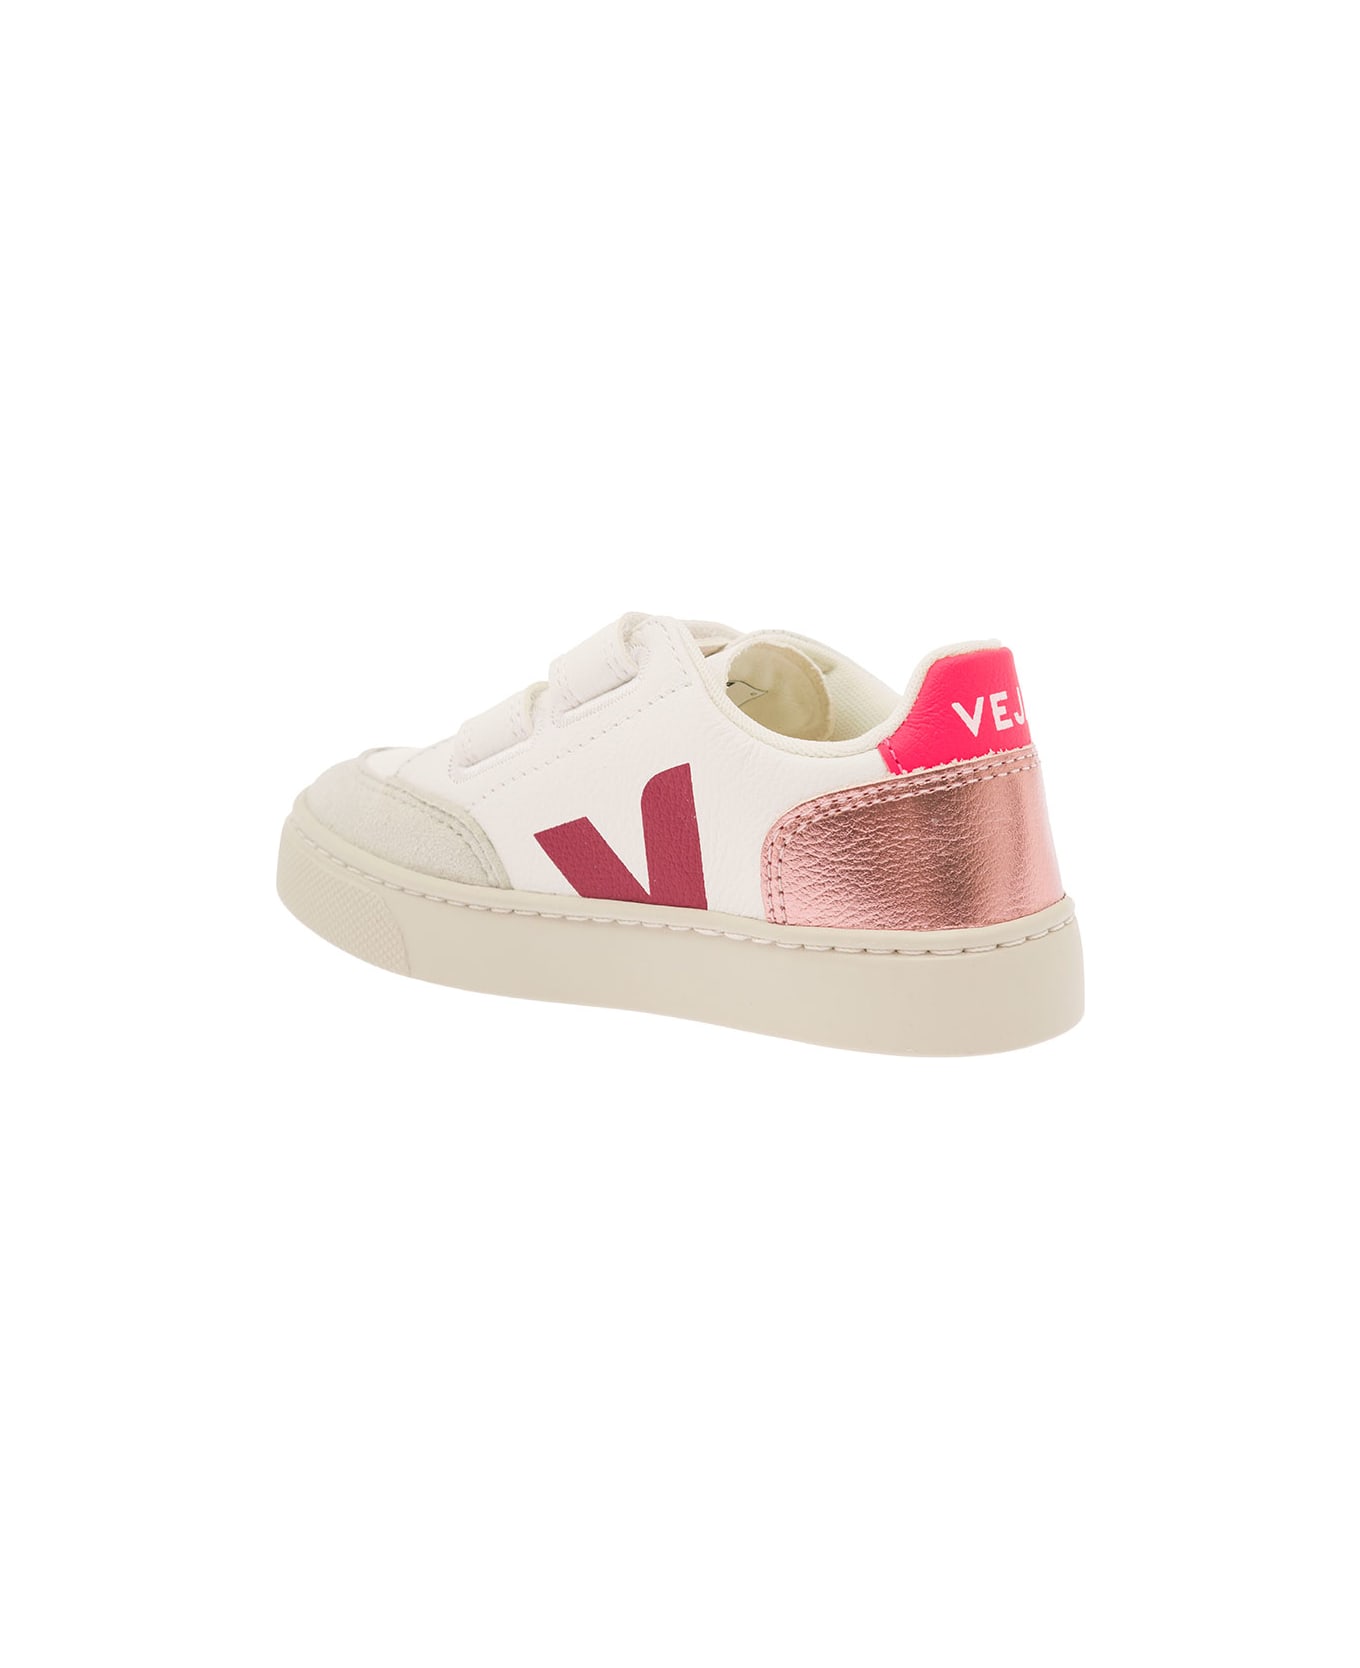 Veja White Sneaker With Fuchsia Logo And Heel Tab In Leather Girl - Multicolor シューズ